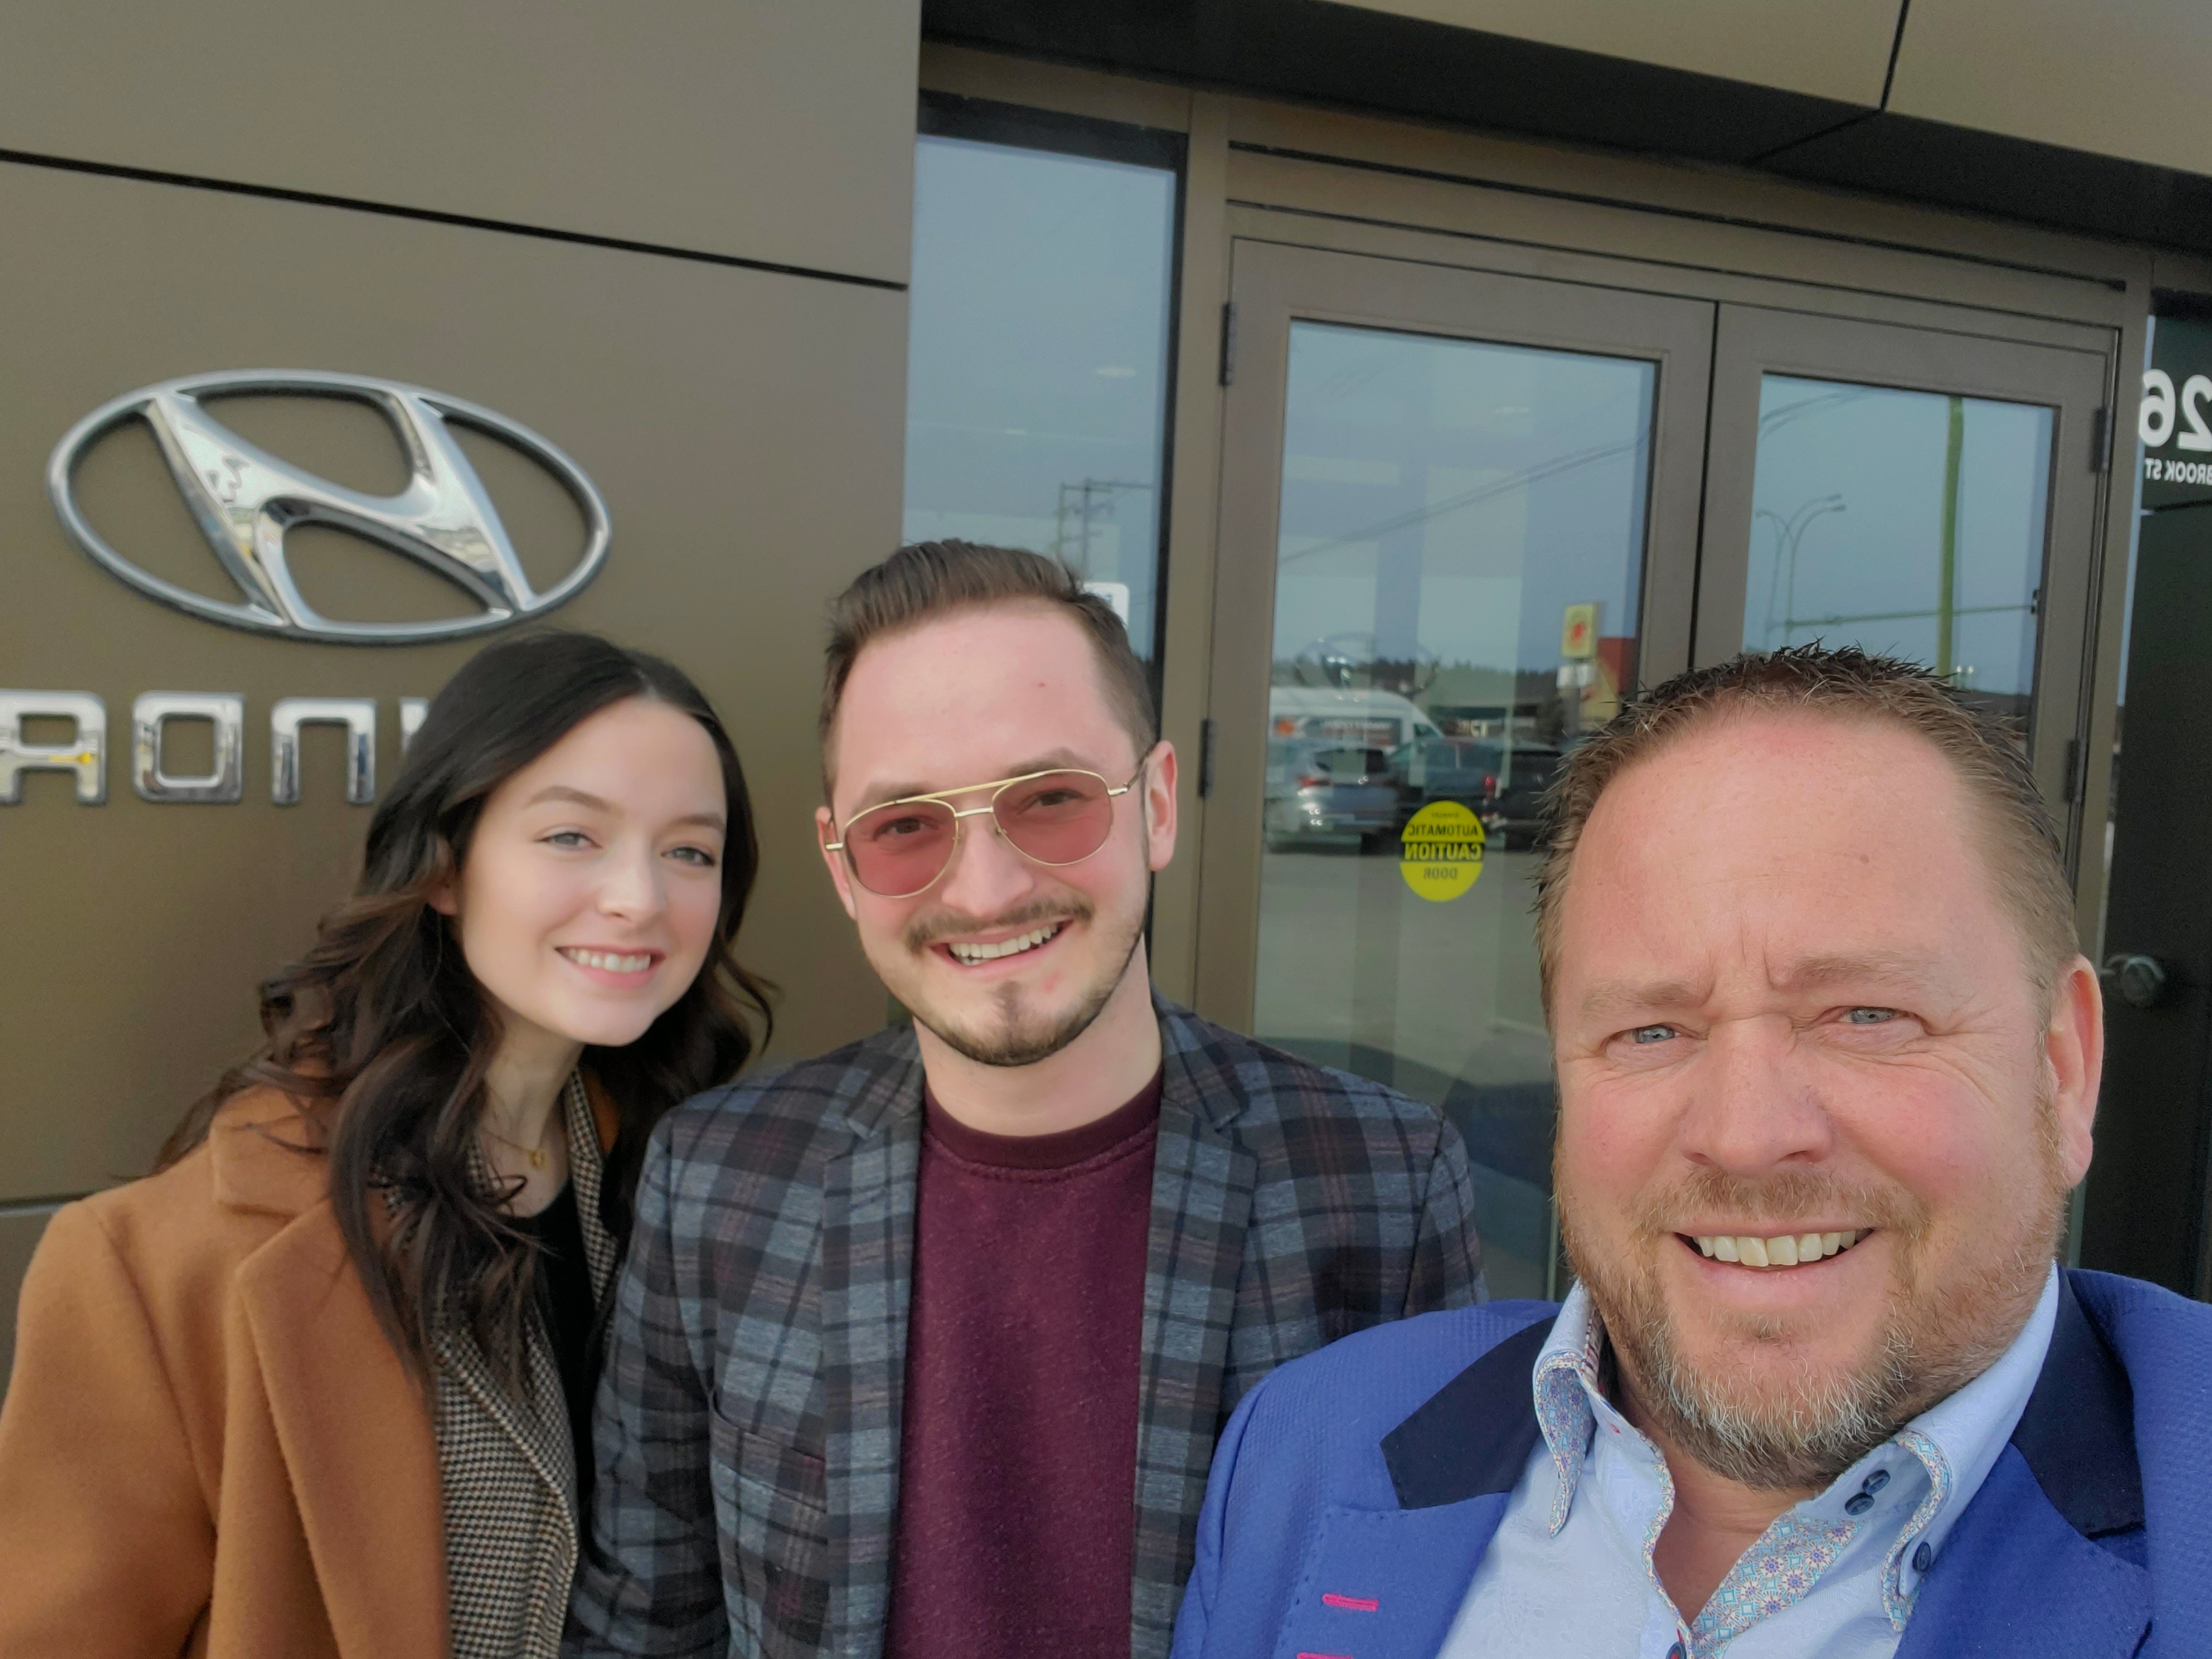 Cranbrook Hyundai is a locally run automotive dealership by the Bullock family. Shown from left to right are Raeanna, Dalton and Bob Bullock.